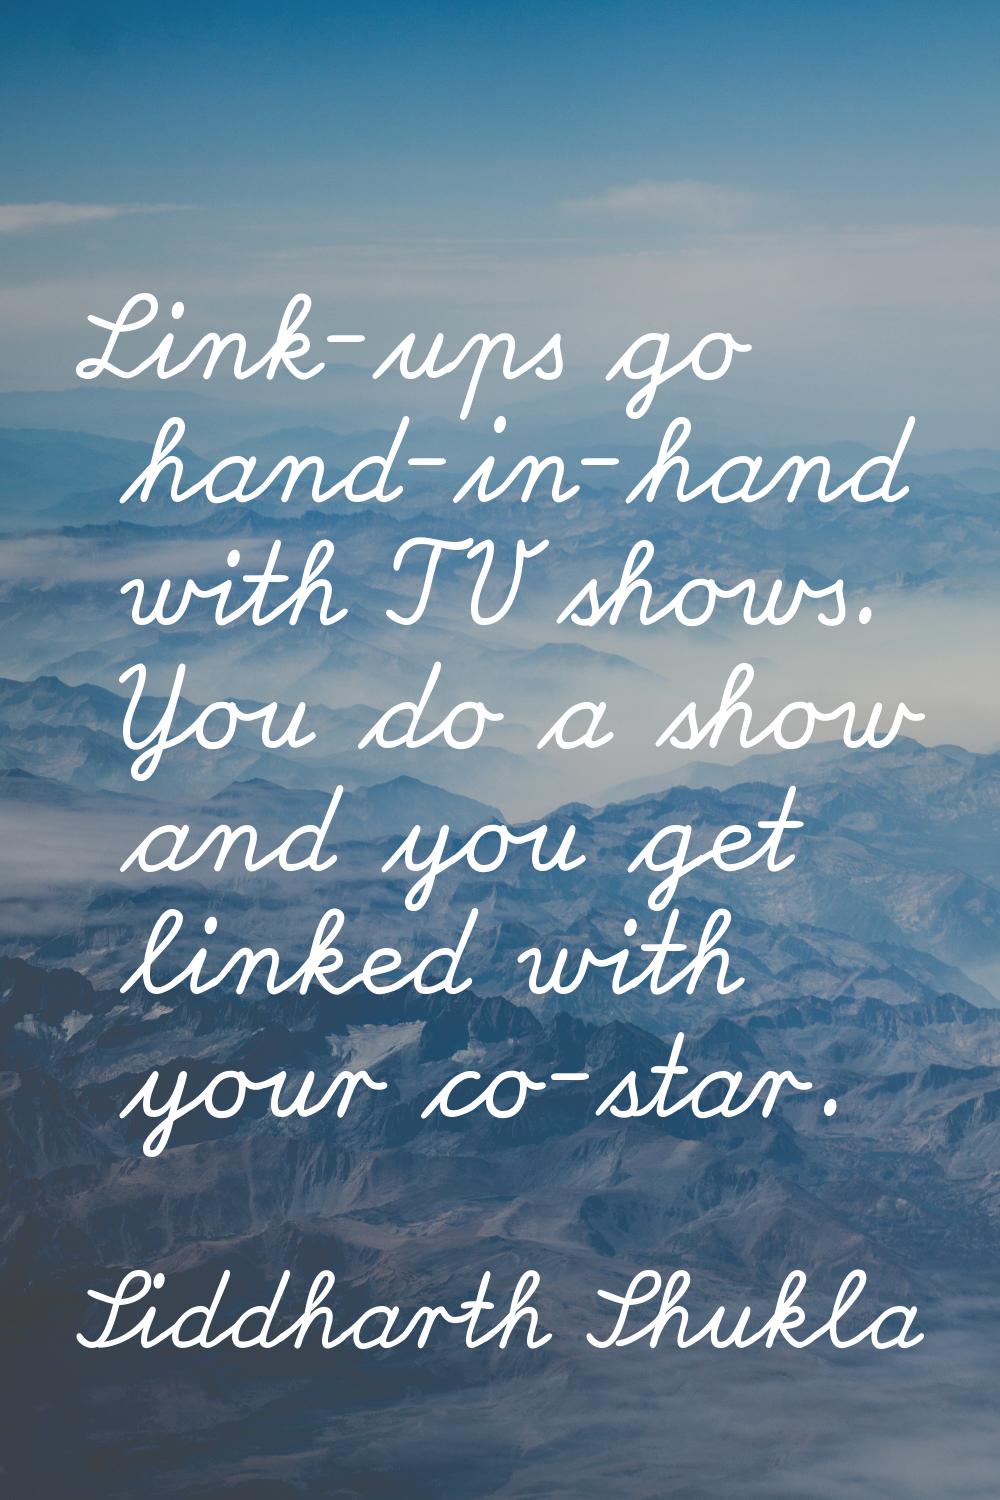 Link-ups go hand-in-hand with TV shows. You do a show and you get linked with your co-star.